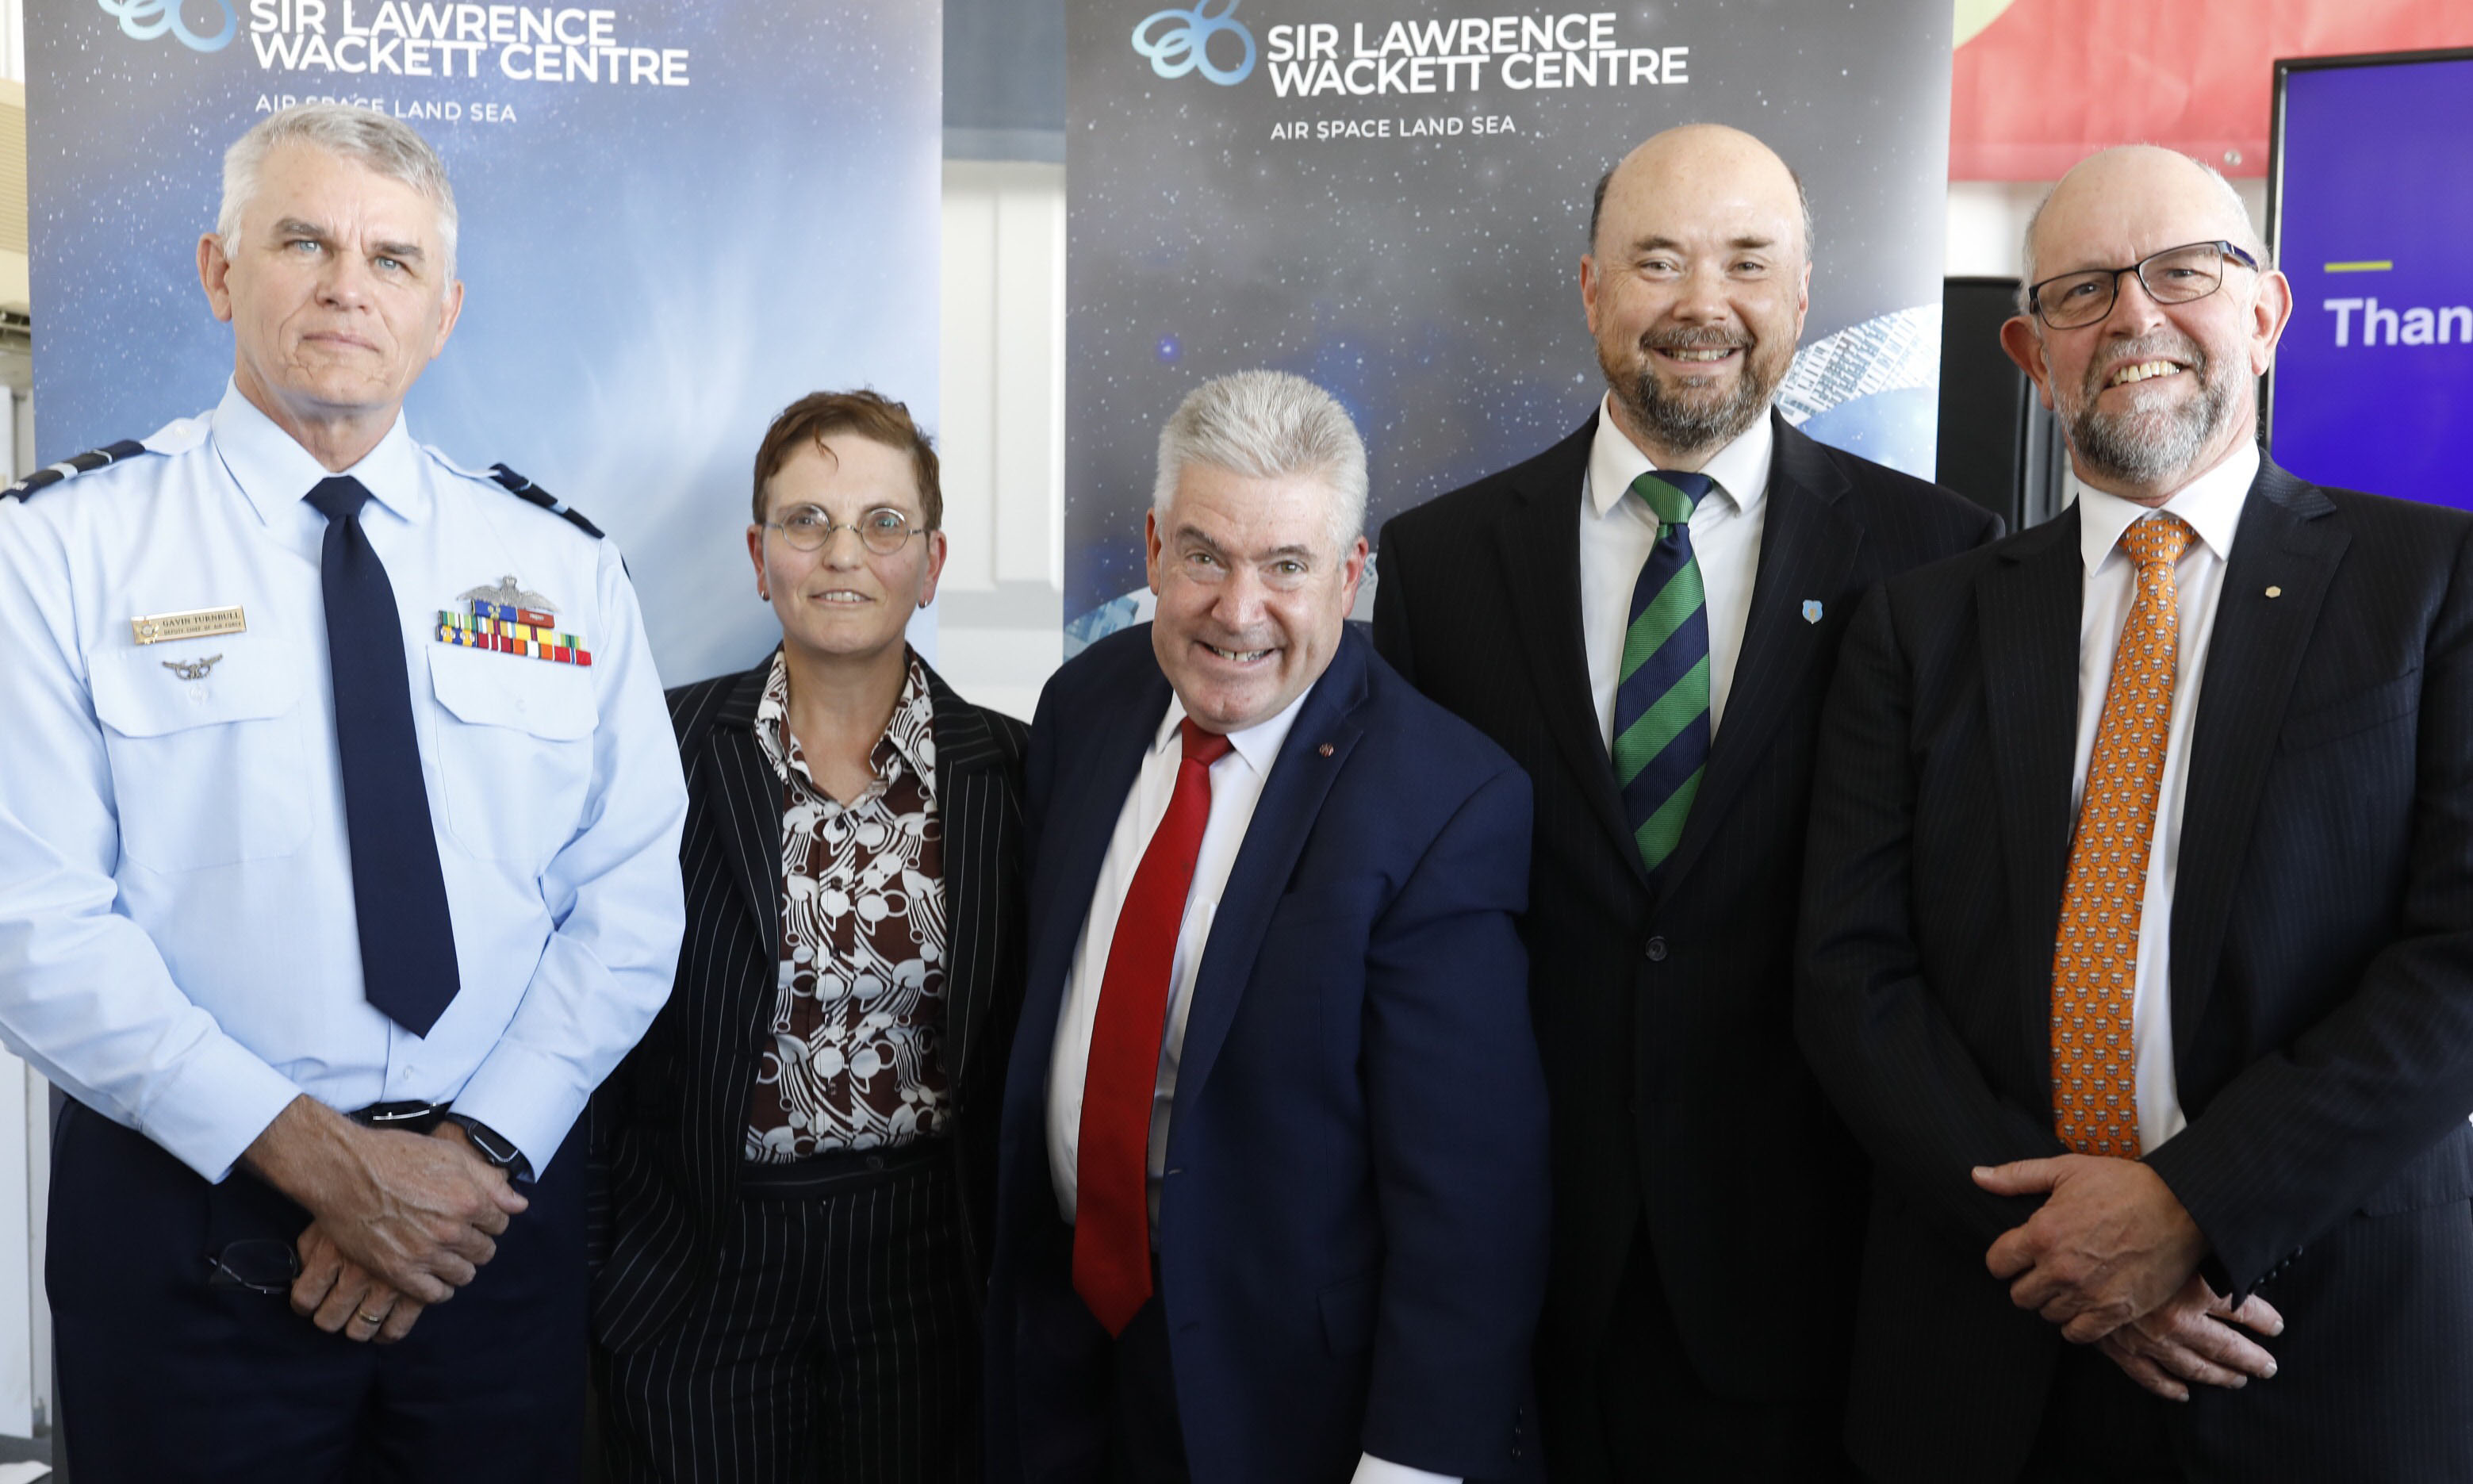 L to R Royal Australian Airforce Air Vice-Marshal Gavin Turnbull AM; RMIT Director Sir Lawrence Wackett Centre, Professor Michelle Gee; RMIT Vice-Chancellor and President Martin Bean CBE; Acting Chief Defence Scientist Dr Todd Mansell and RMIT Professor Industry Fellow (Defence) Dr Ken Anderson at the launch.